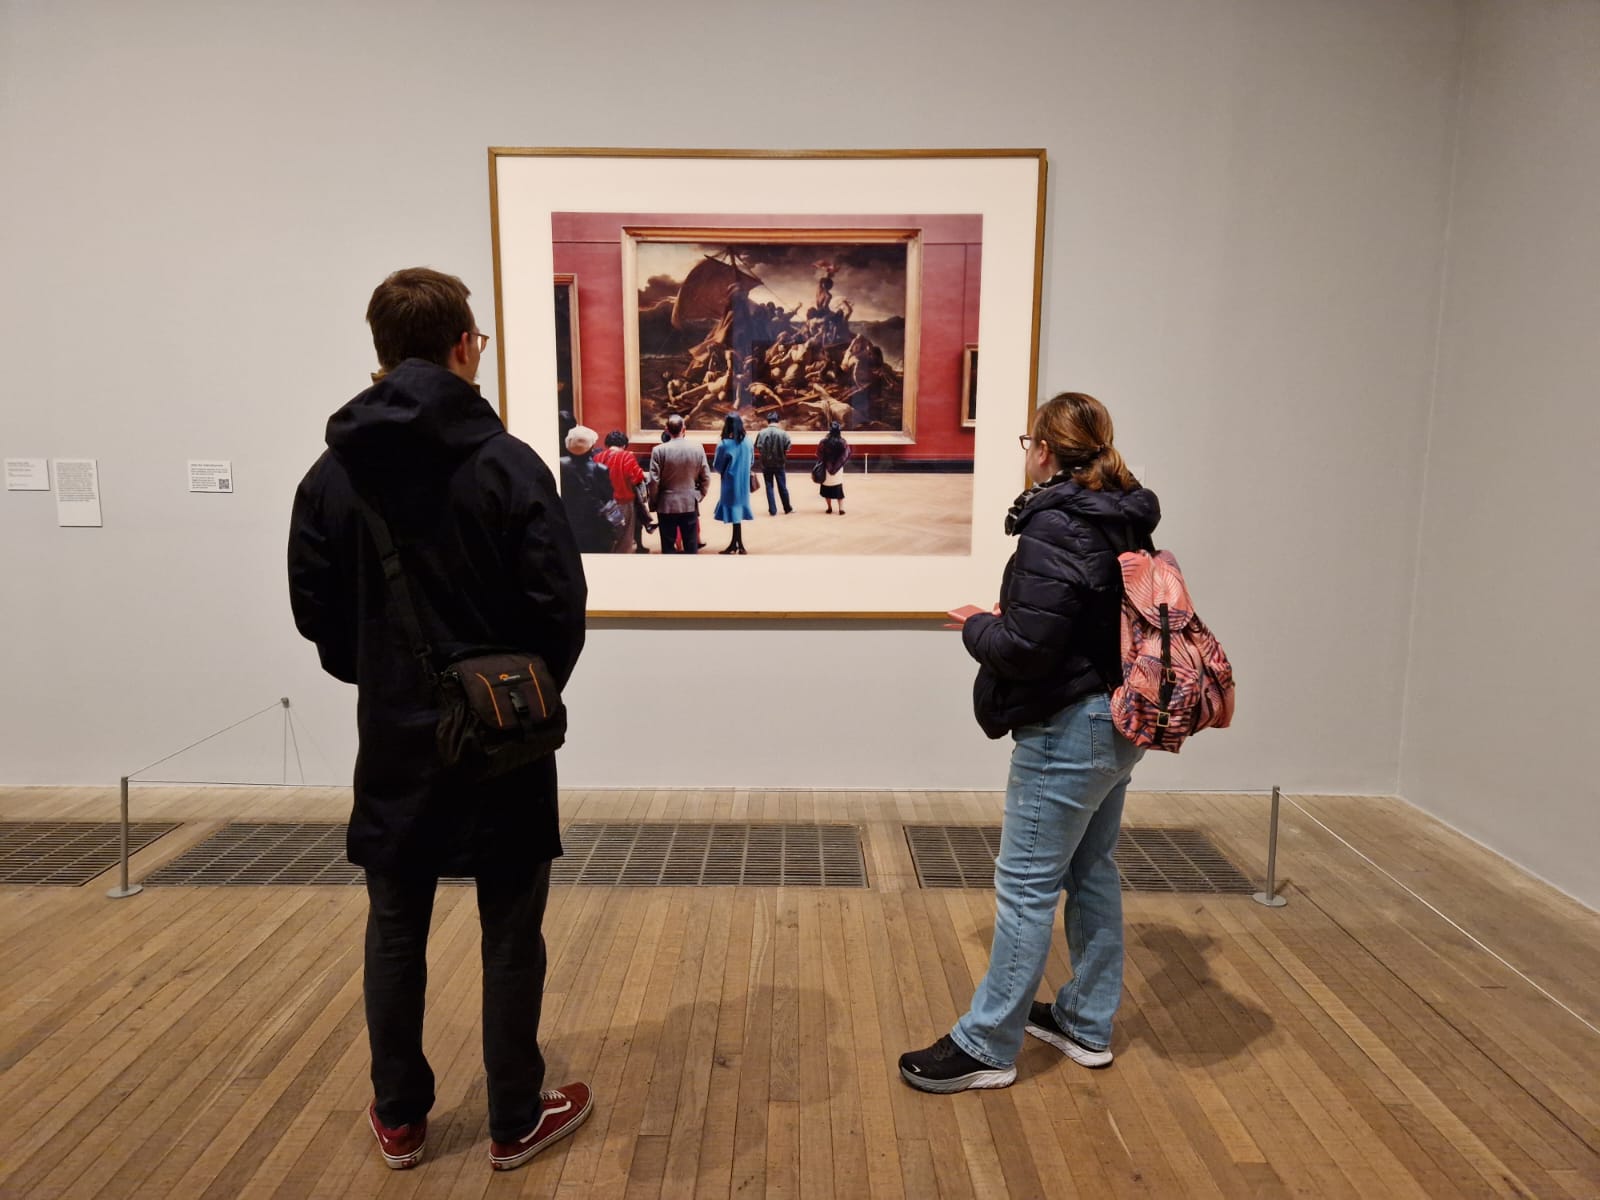 People in a museum looking at a piece of art in which there are people in a museum looking at a piece of art!